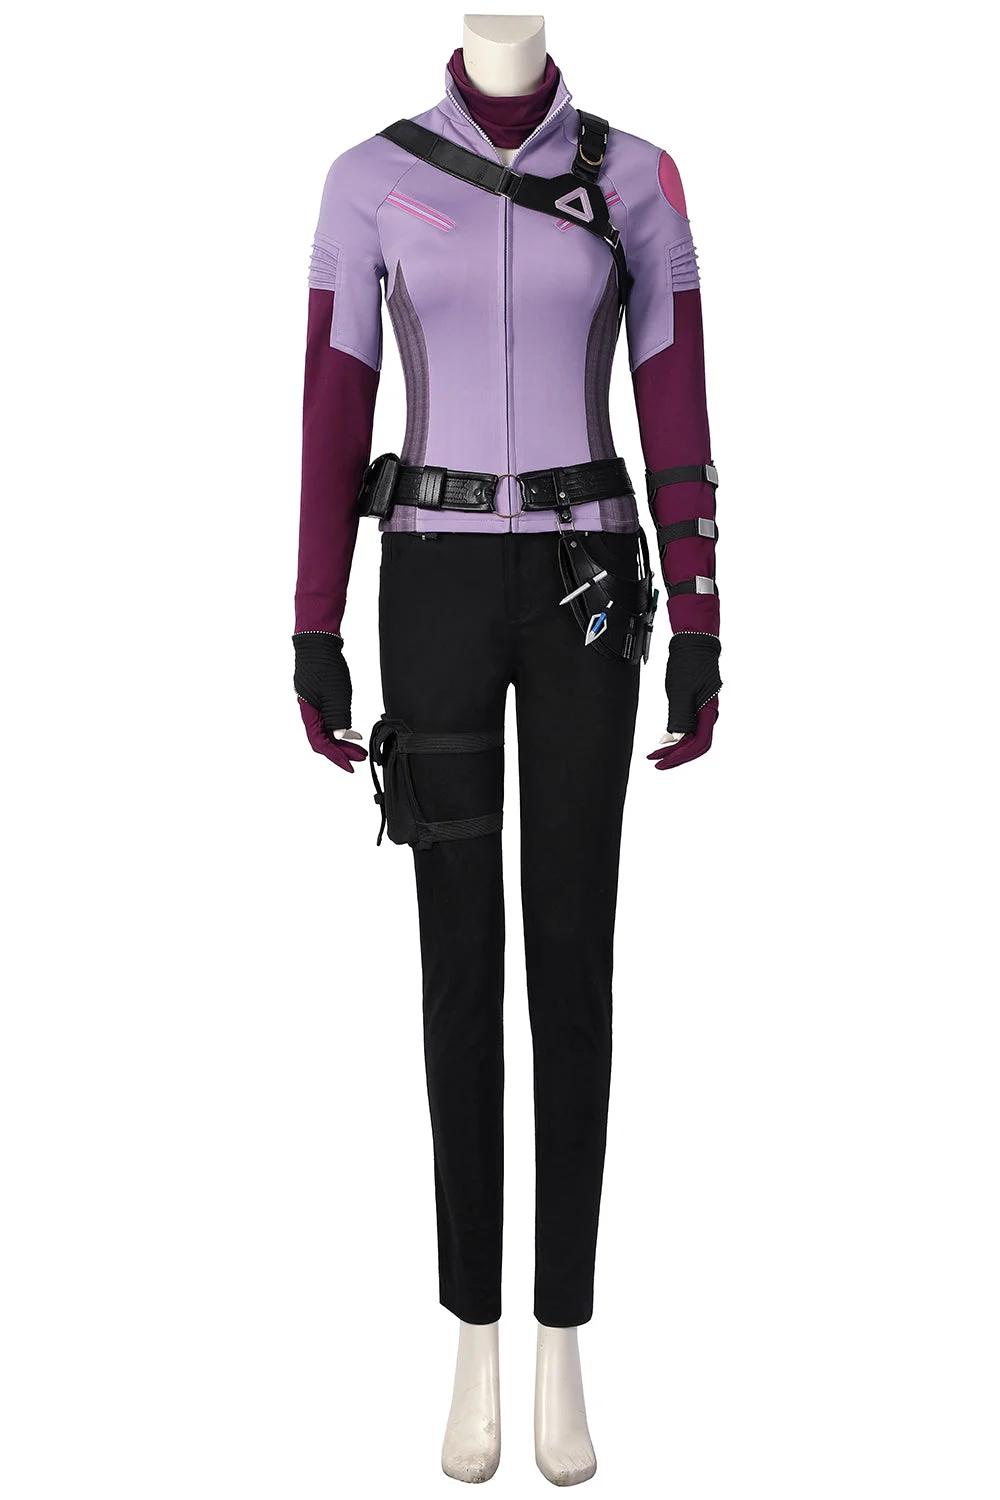 Avengers Hawkeye Kate Bishop Cosplay Costume Suit with bow and arrow Backpack By CosplayLab